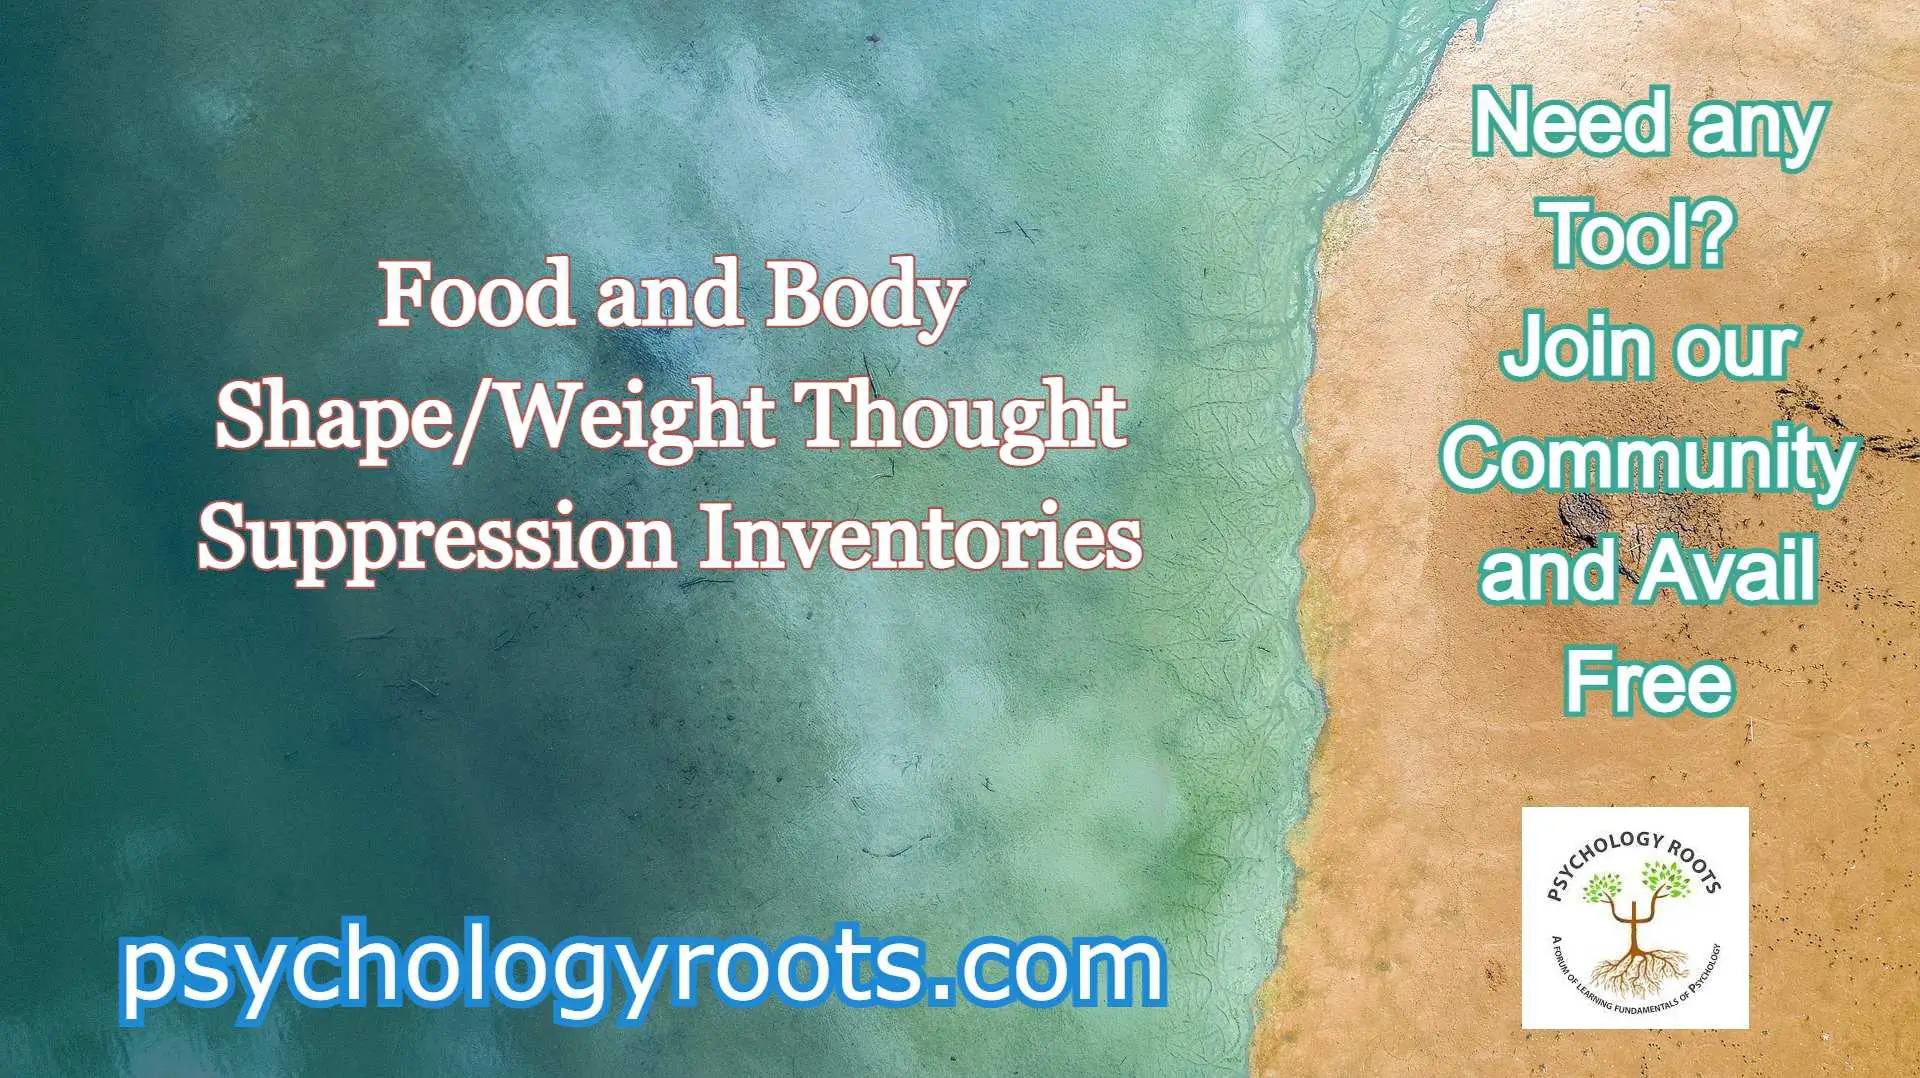 Food and Body Shape/Weight Thought Suppression Inventories